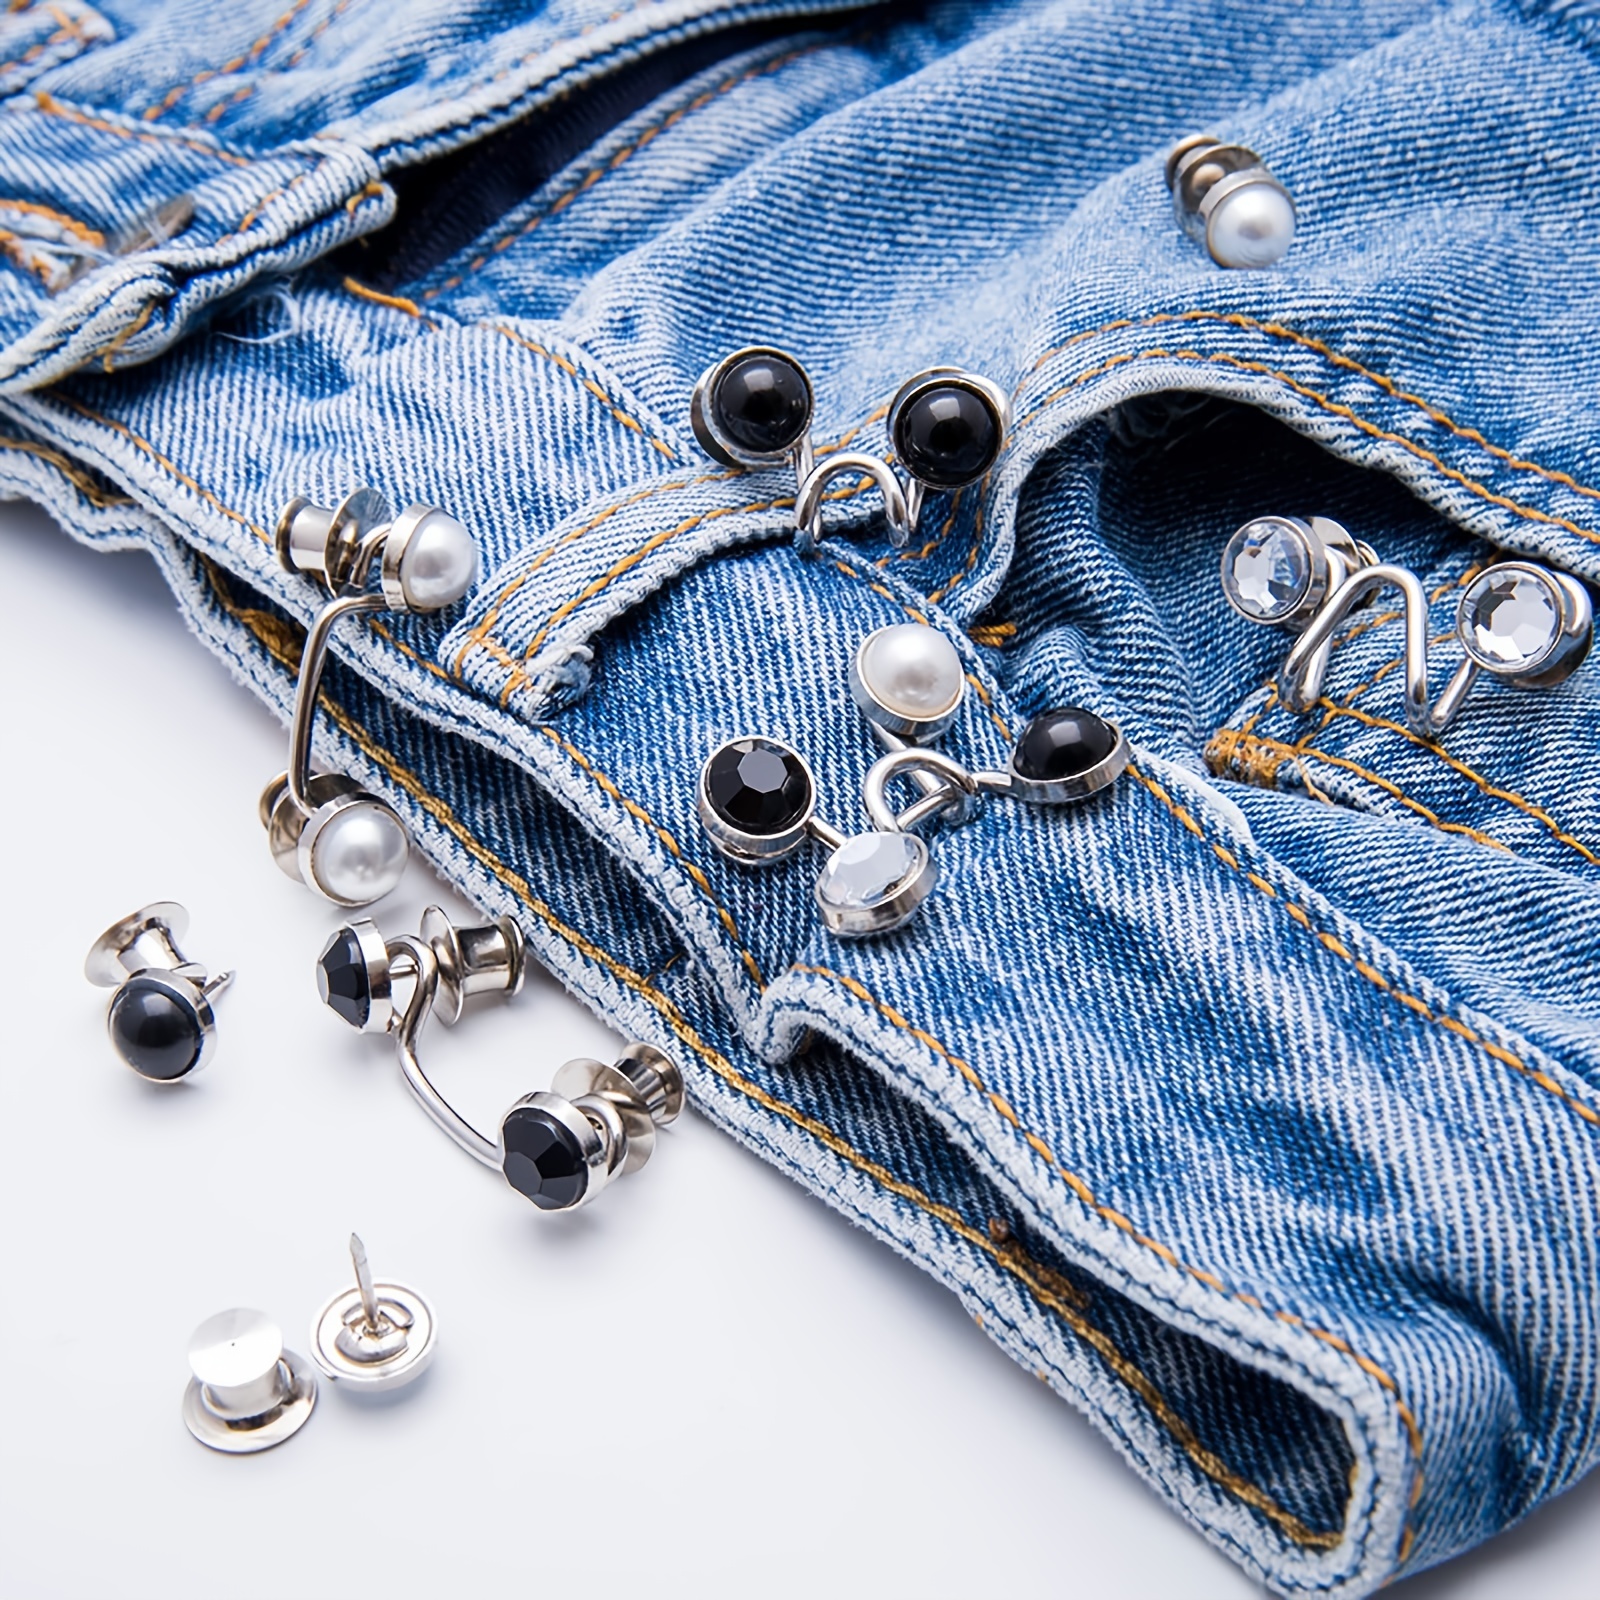 1 Set Of Pant Waist Tightener Instant Jean Buttons For Loose Jeans Pants  Clips For Waist Detachable Jean Buttons Pins No Sewing Waistband Tightener